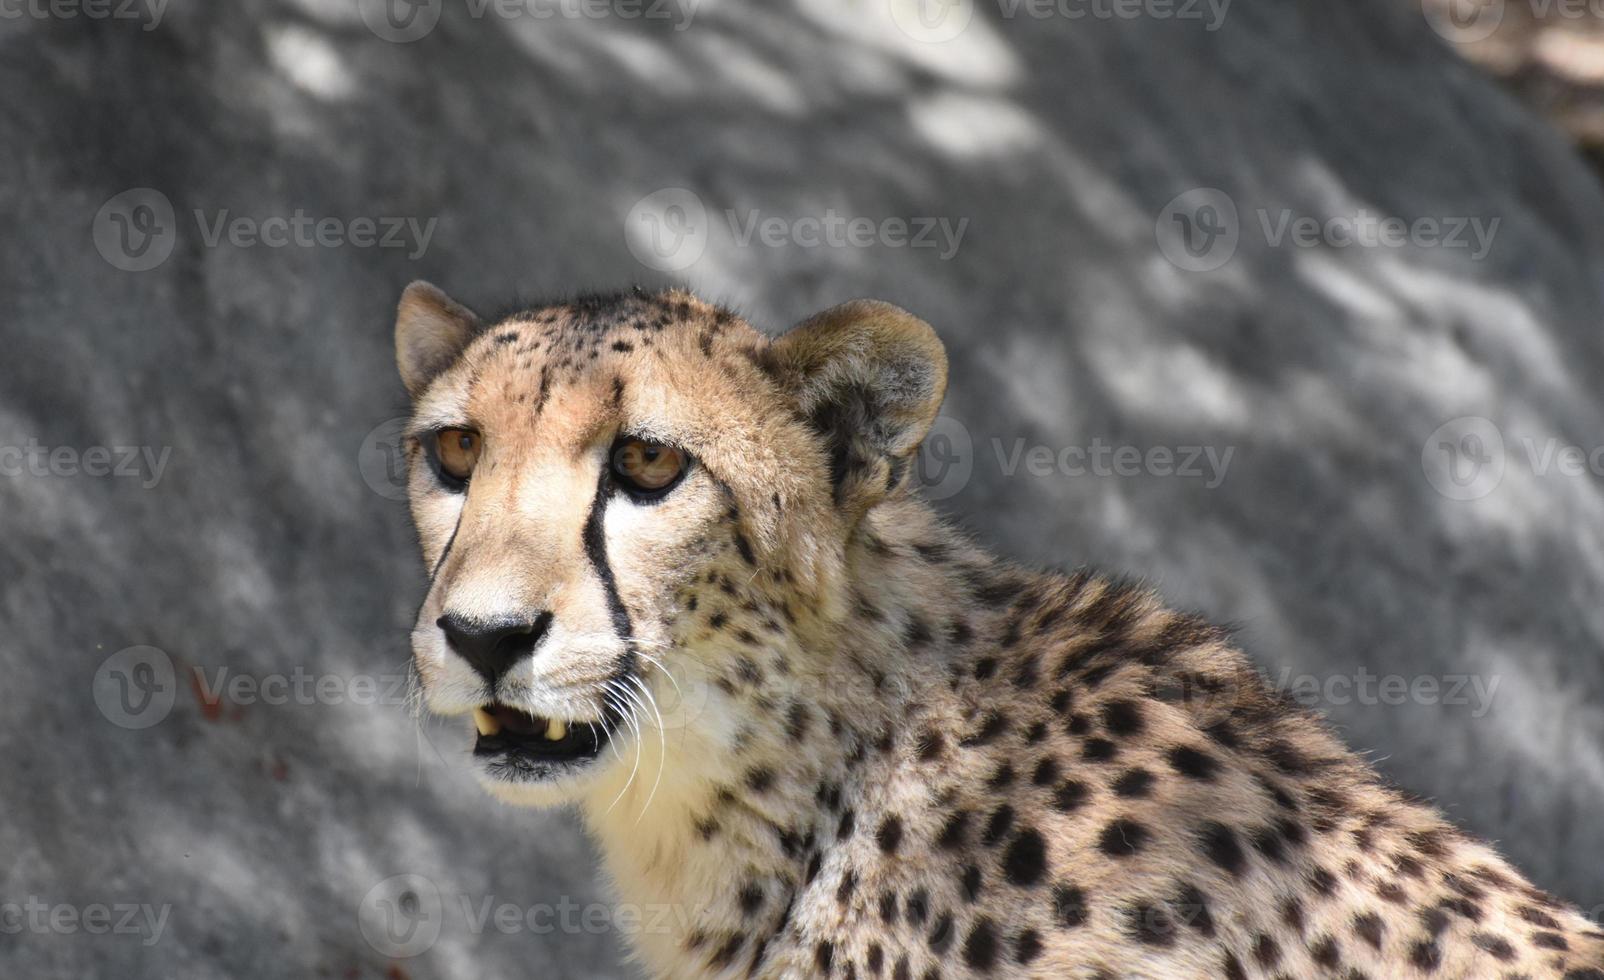 Agitated Cheetah With his Mouth Slightly Open photo